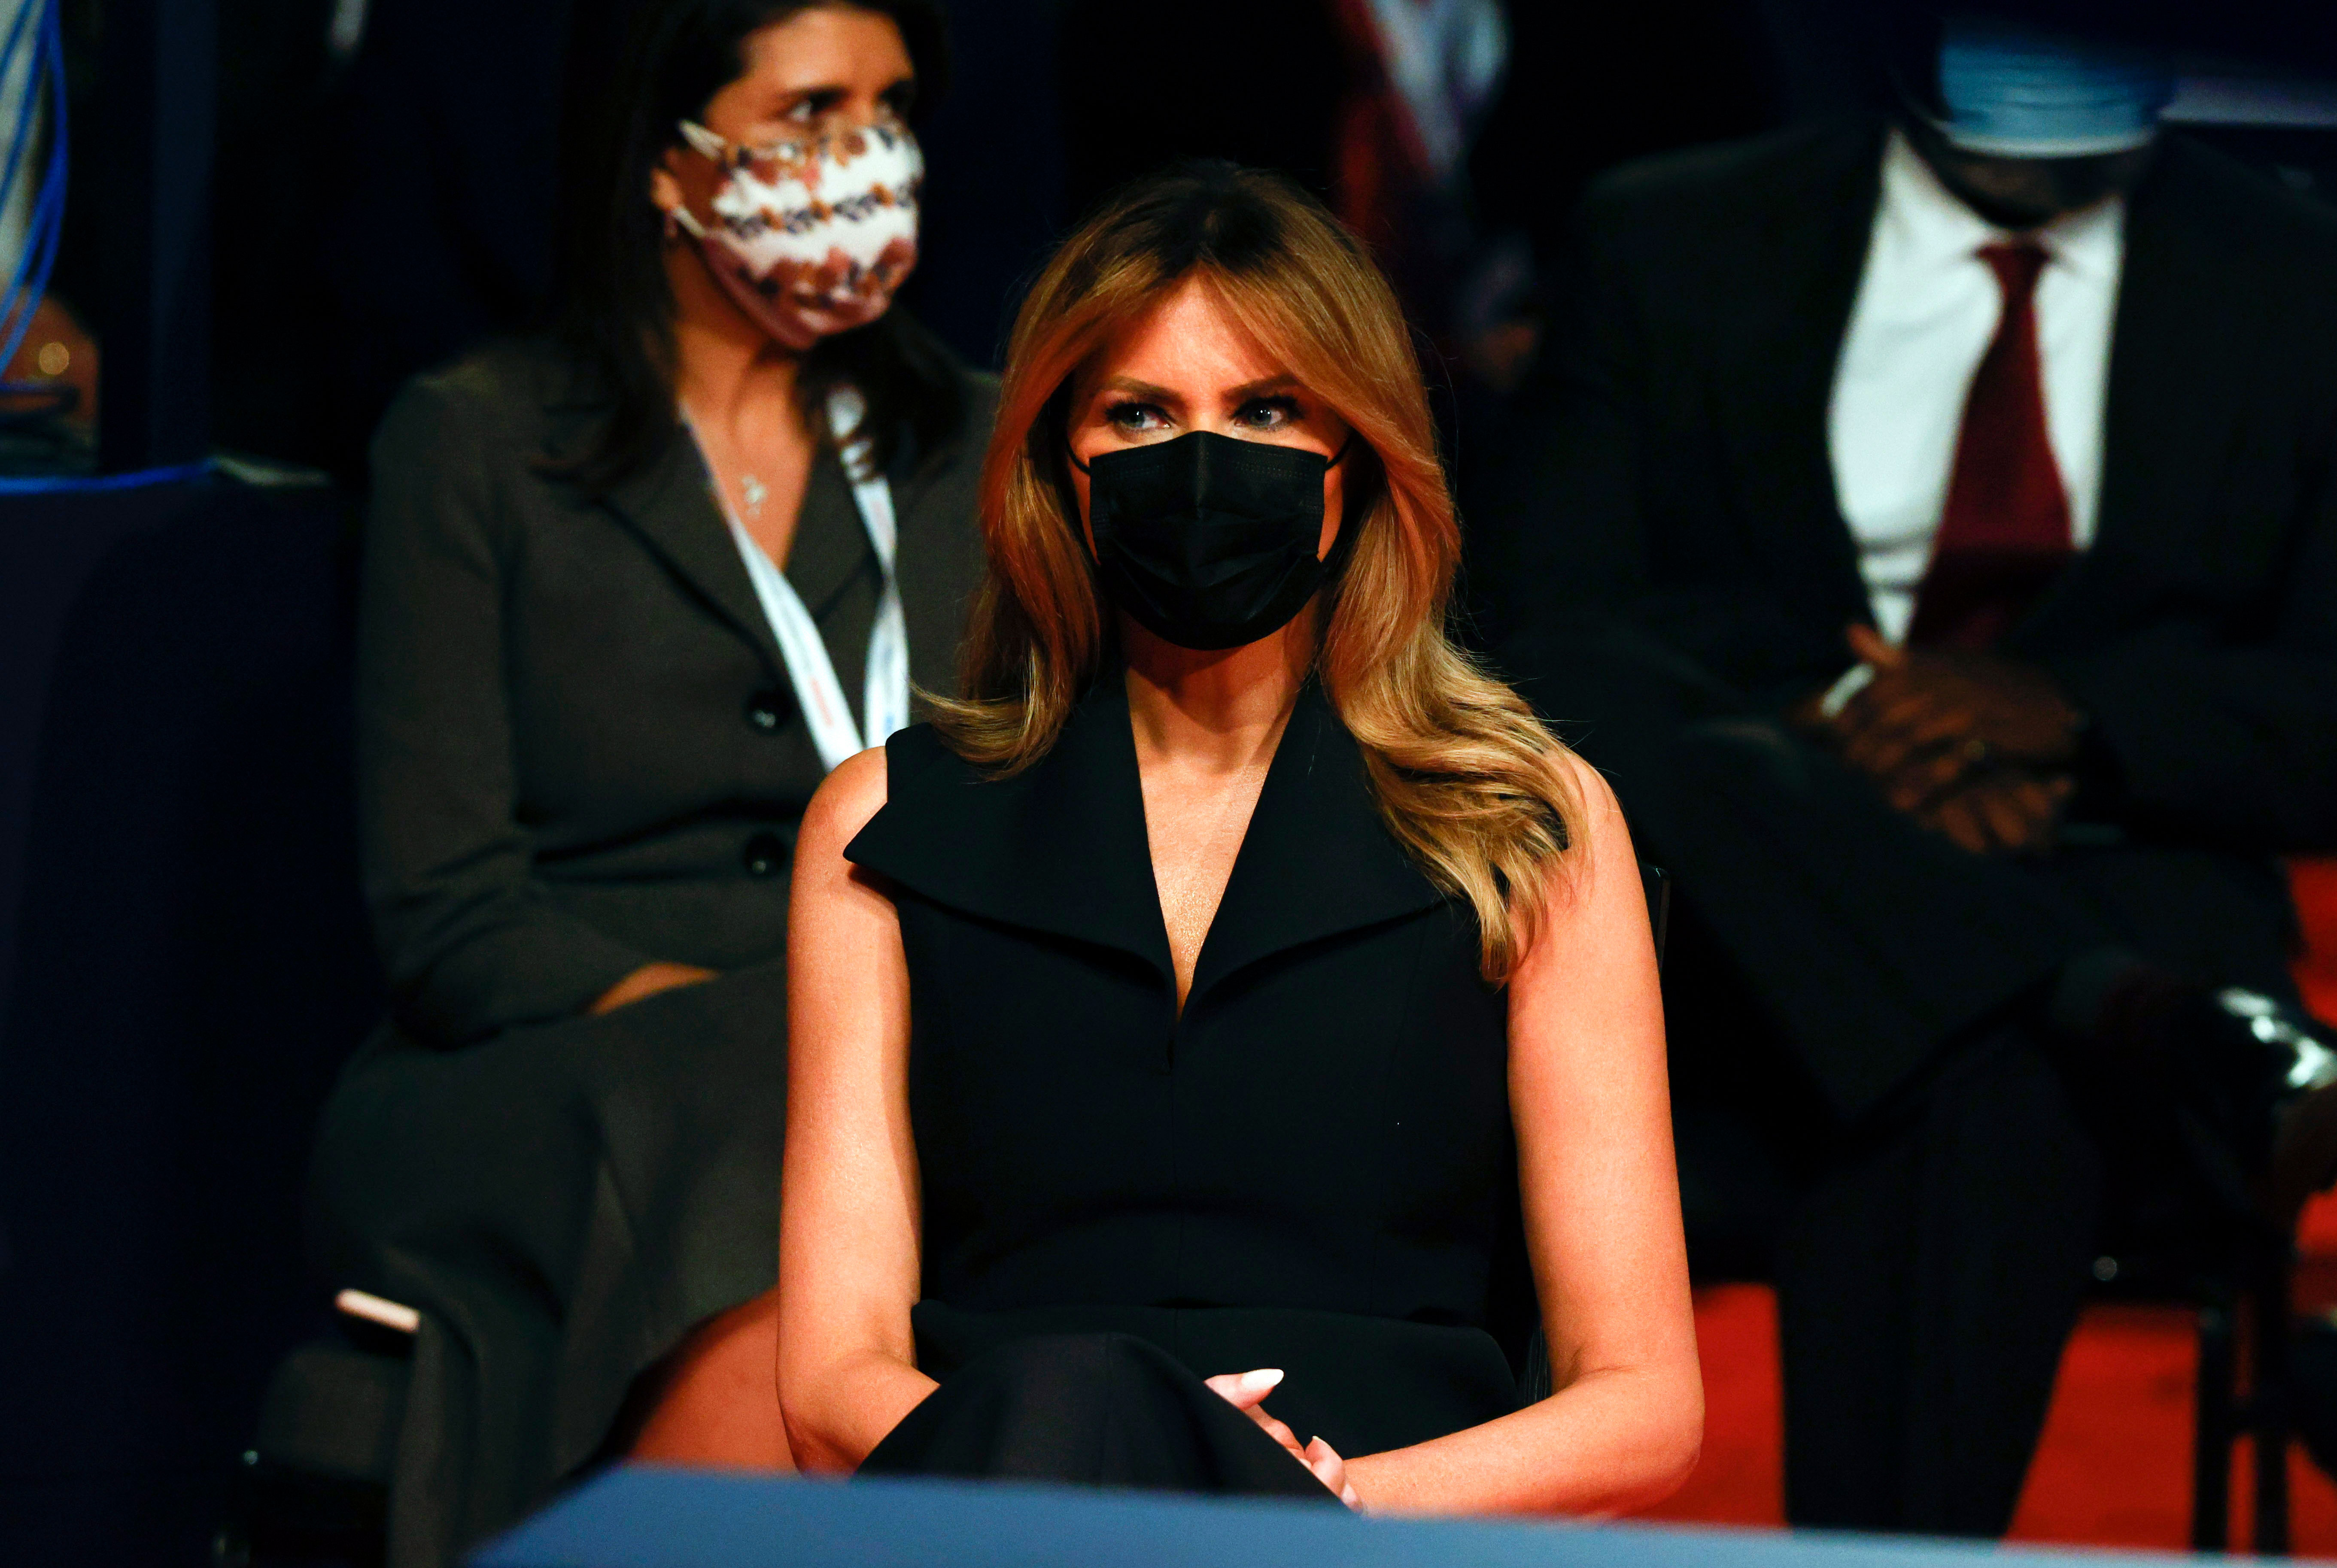 First lady Melania Trump attends a presidential debate in Nashville on October 22.